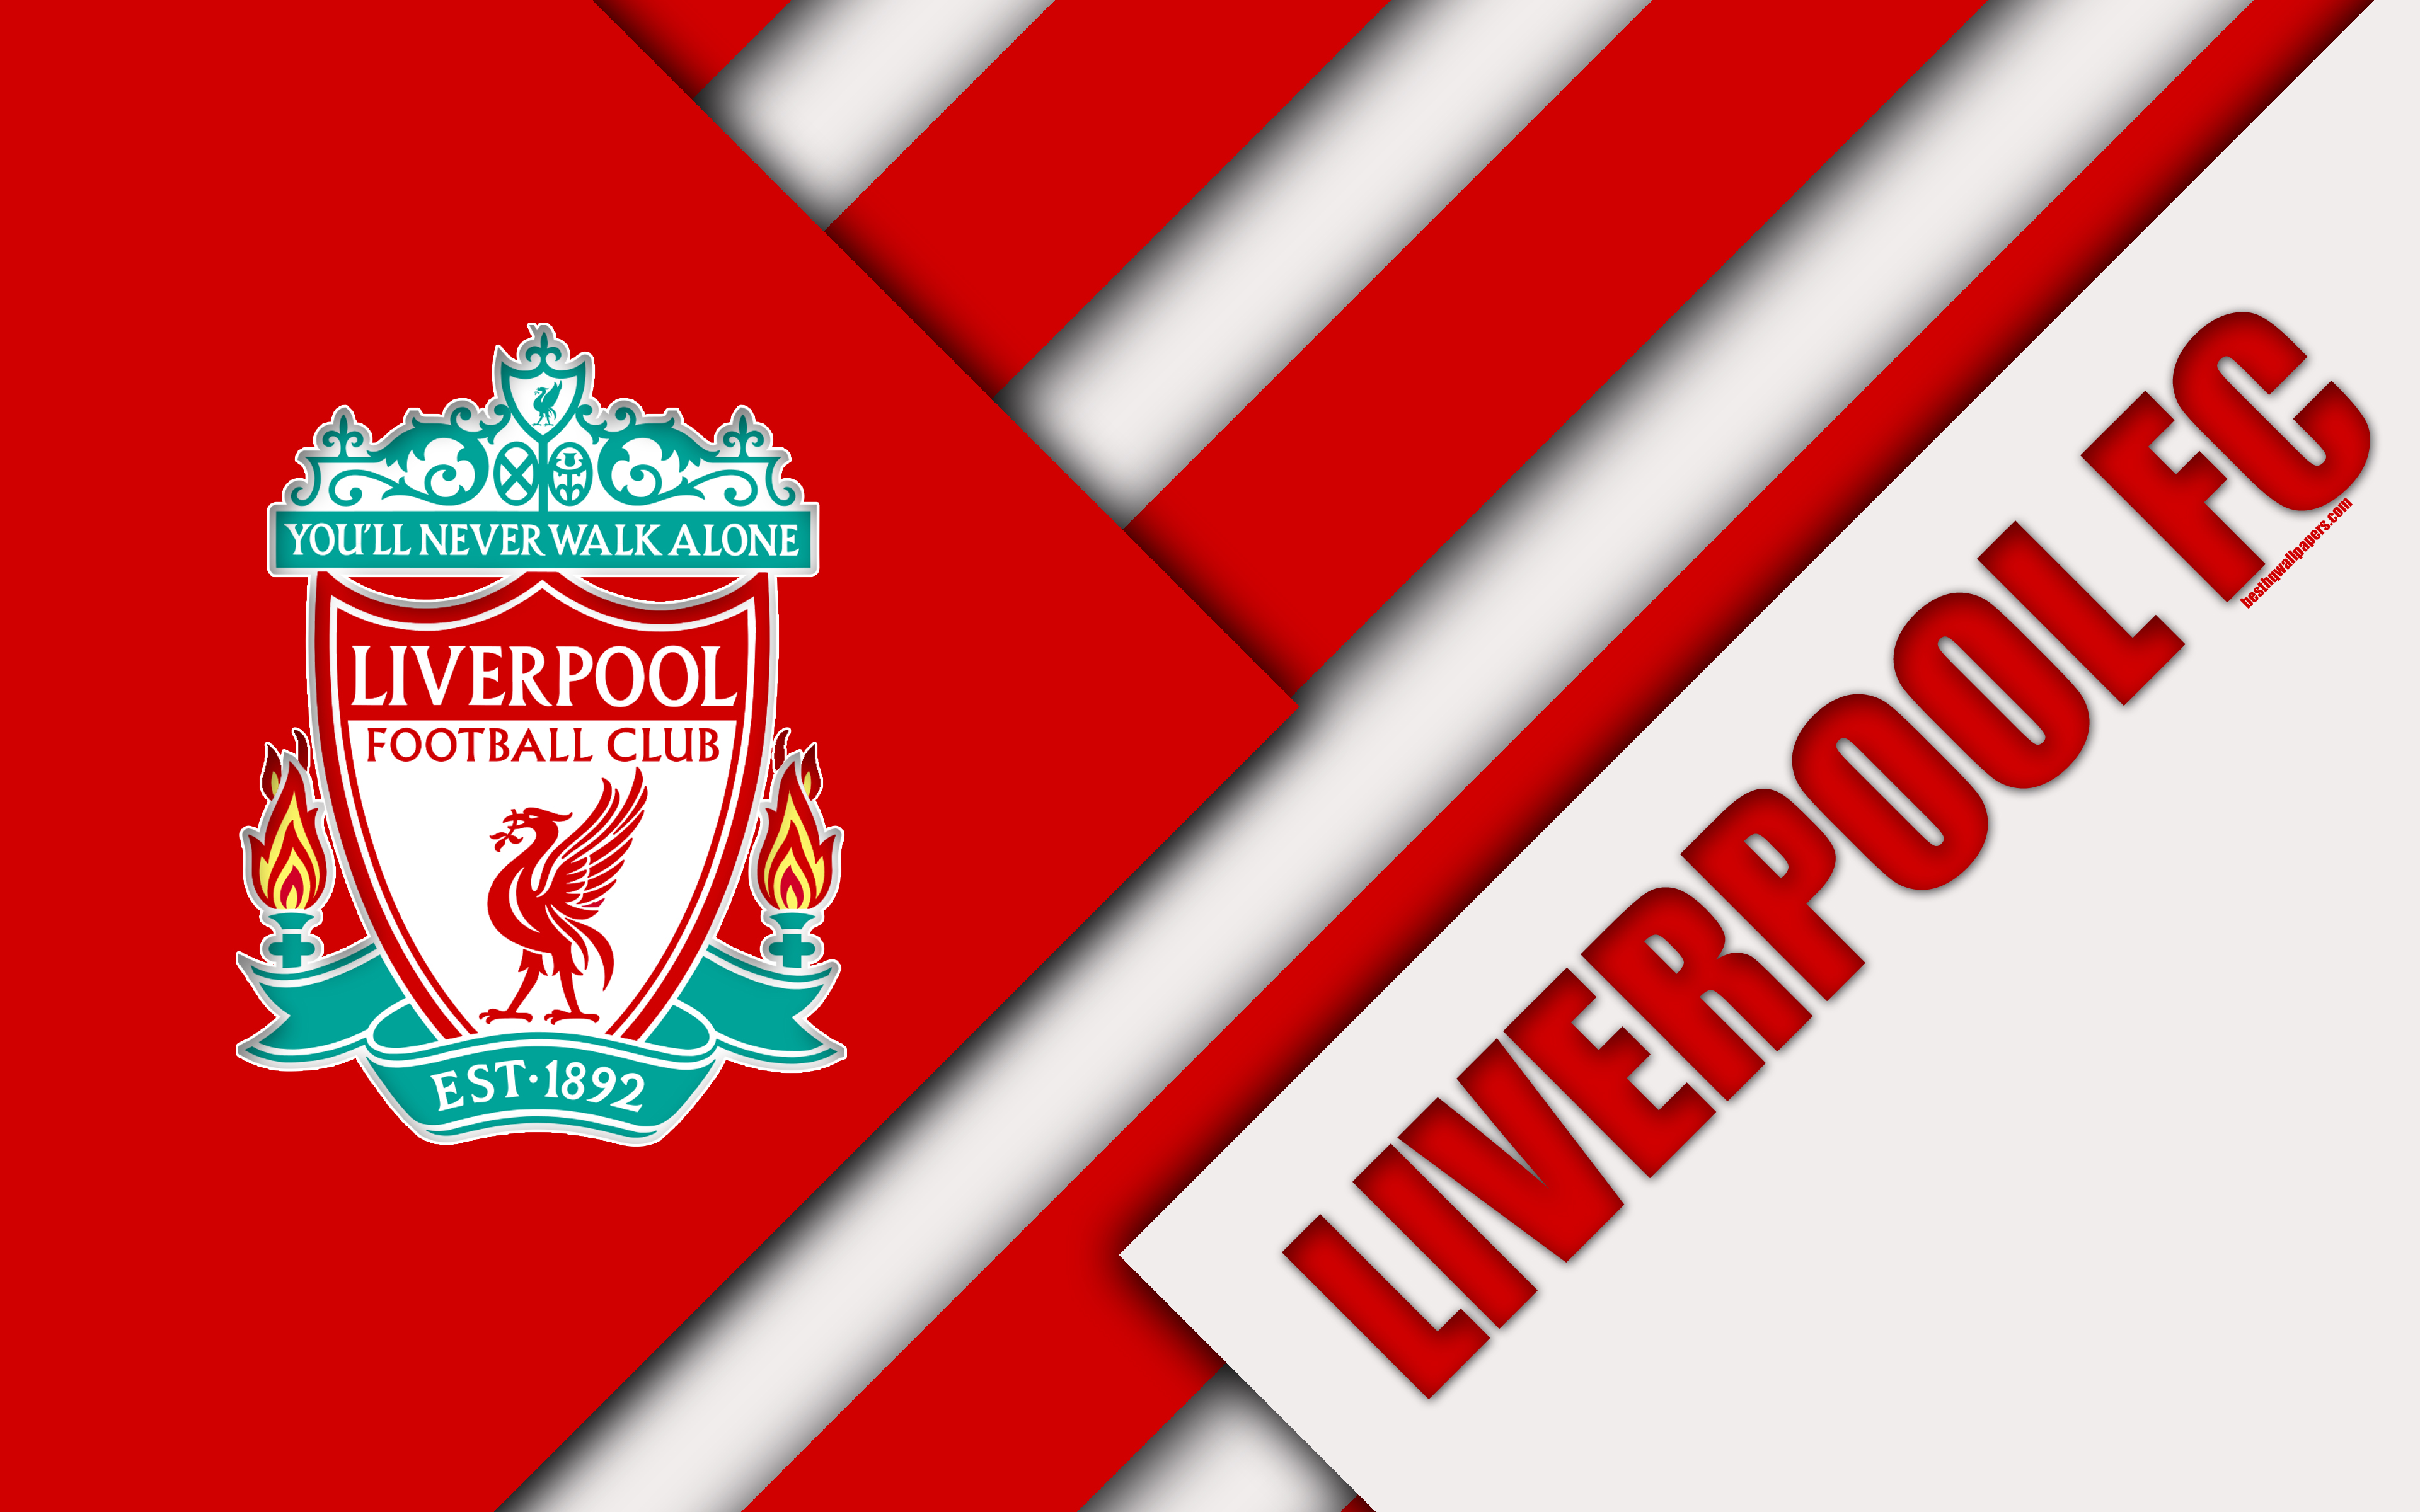 Download wallpaper Liverpool FC, logo, 4k, material design, red white abstraction, football, Liverpool, England, UK, Premier League, English football club for desktop with resolution 3840x2400. High Quality HD picture wallpaper